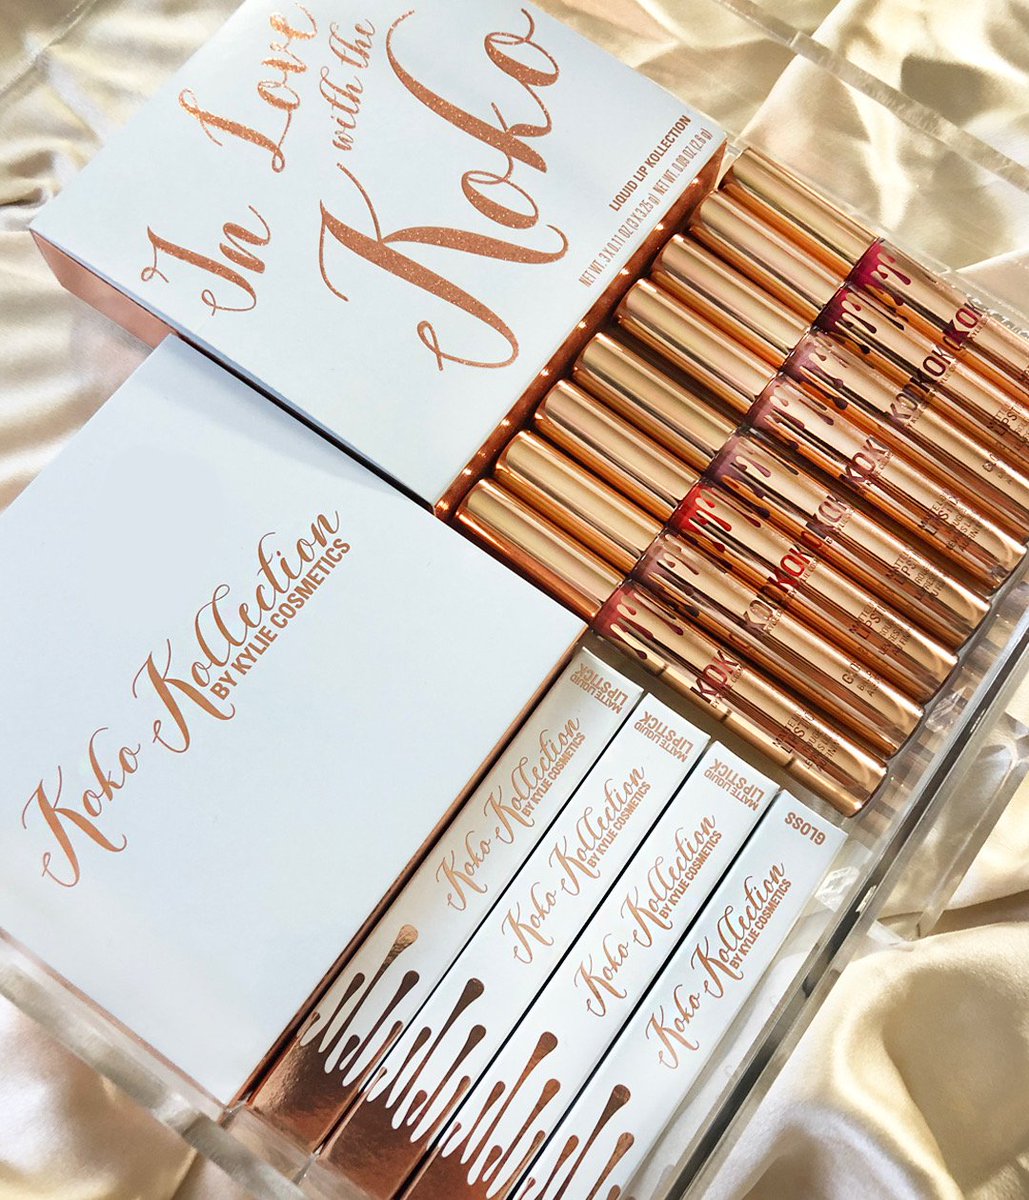 You can now get all 8 of my #KokoKollection for @kyliecosmetics shades as singles!! https://t.co/1CYPOujQXN https://t.co/CnEJhluqVc